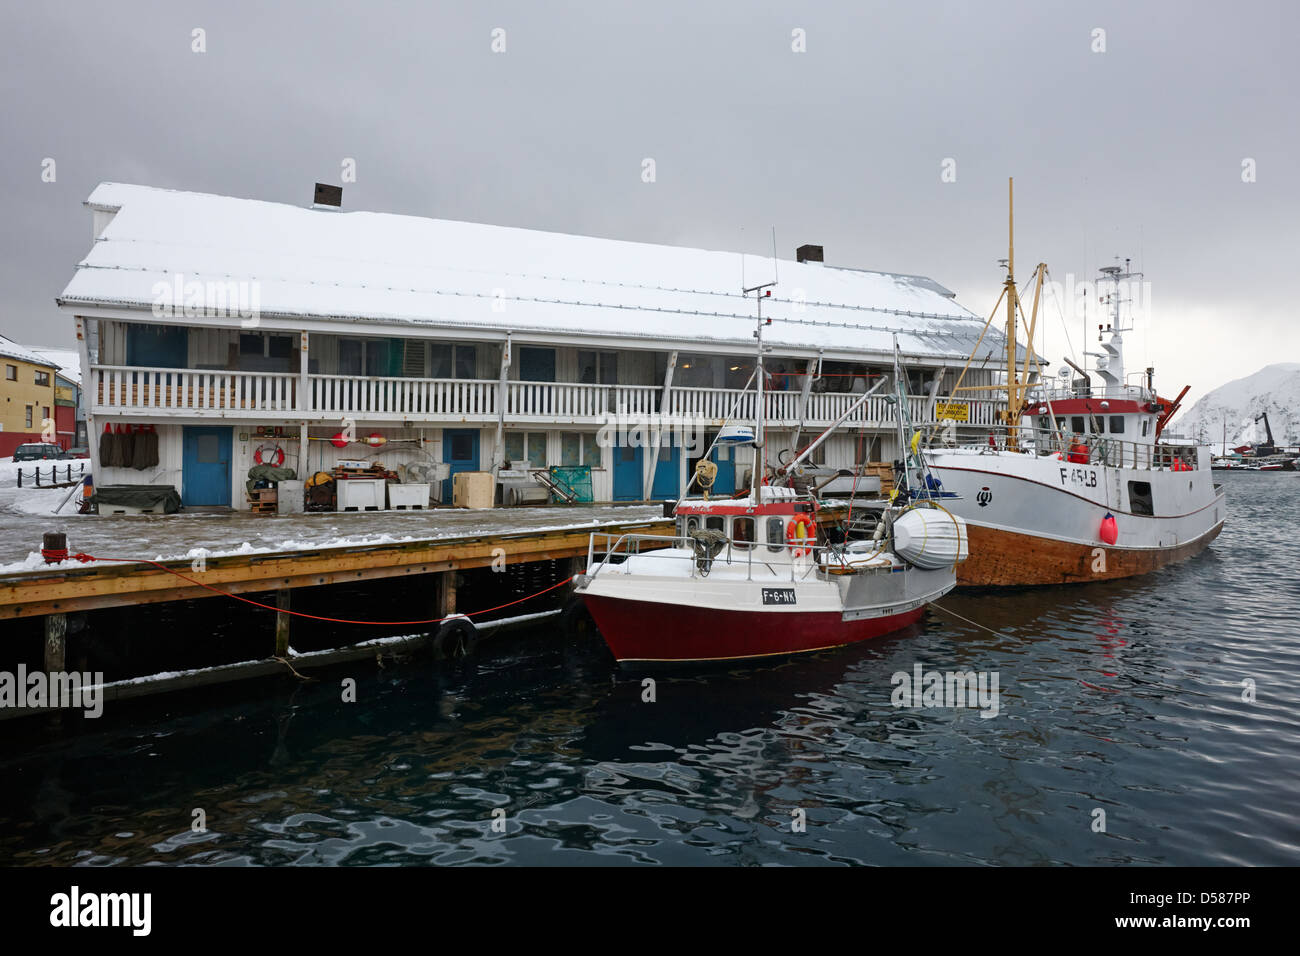 old warehouses and small fishing boats Honningsvag harbour finnmark norway europe Stock Photo